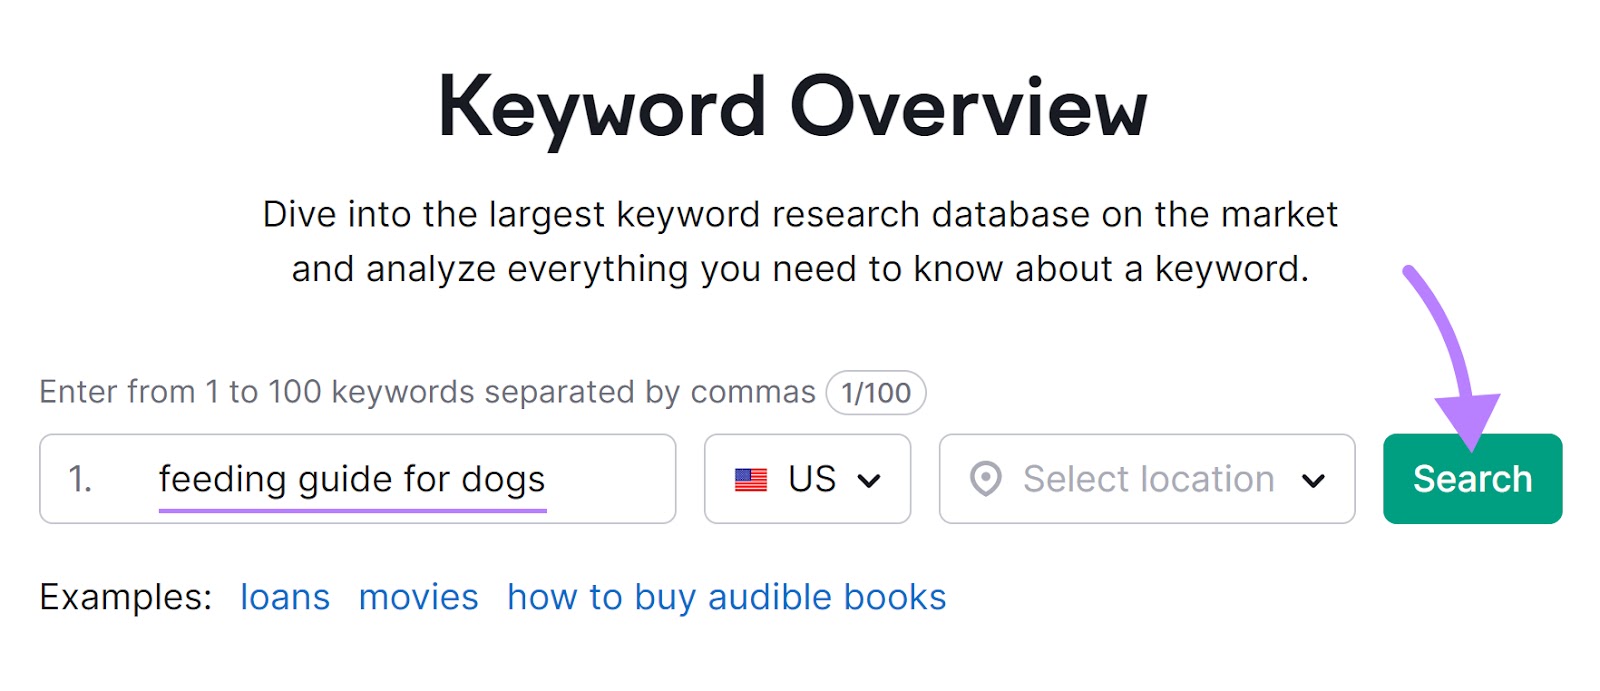 "feeding guide for dogs" entered into the Keyword Overview search bar